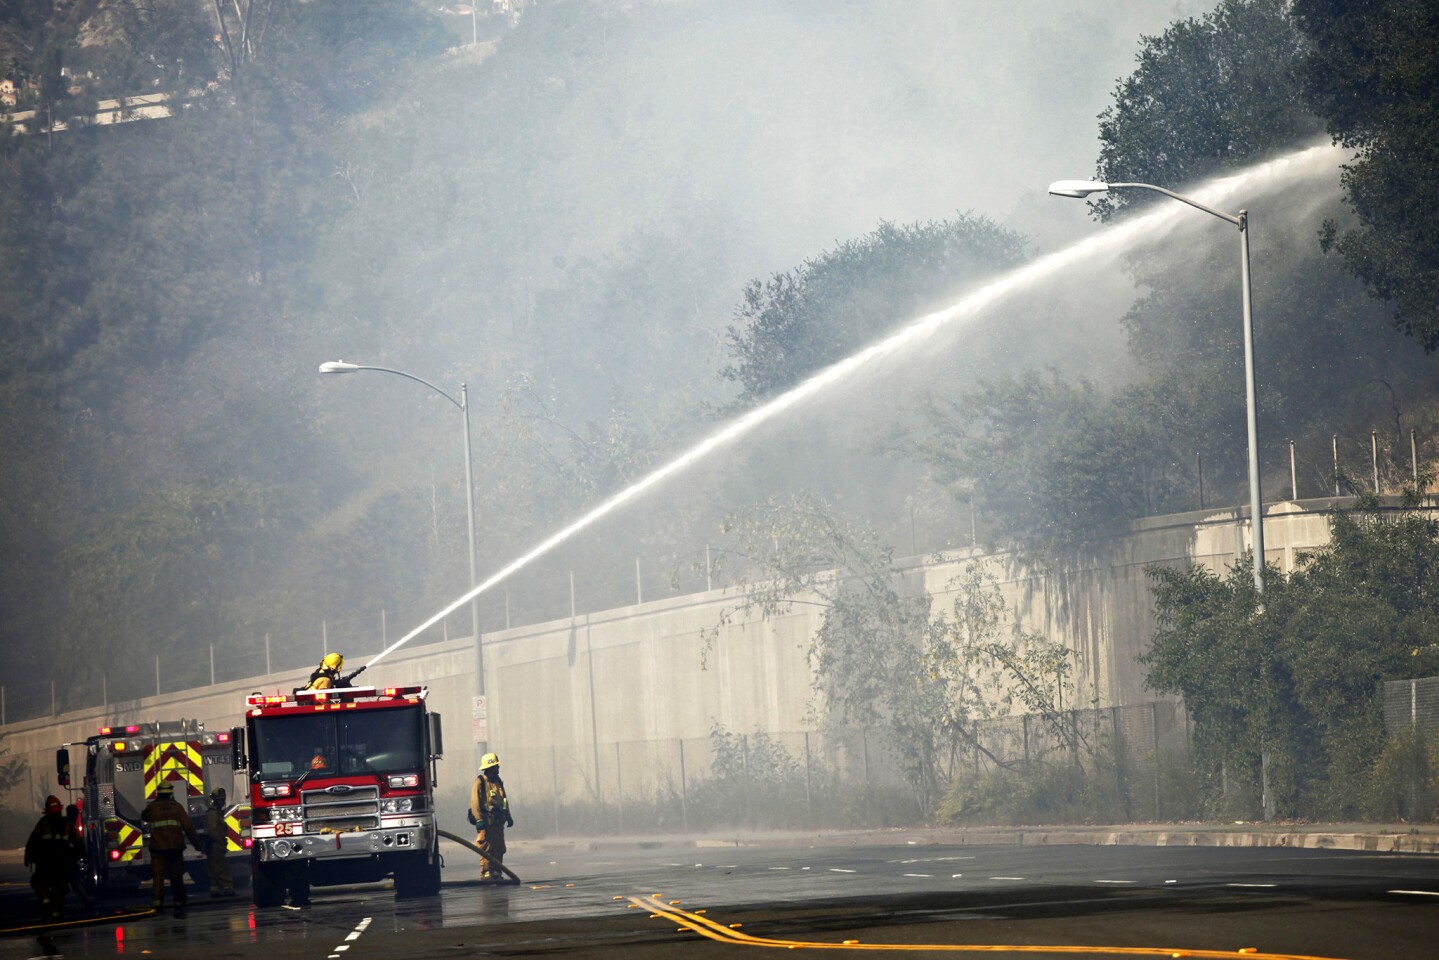 Firefighters on Harvey Drive hose down brush along the Glendale Freeway as a fire burns in the area.